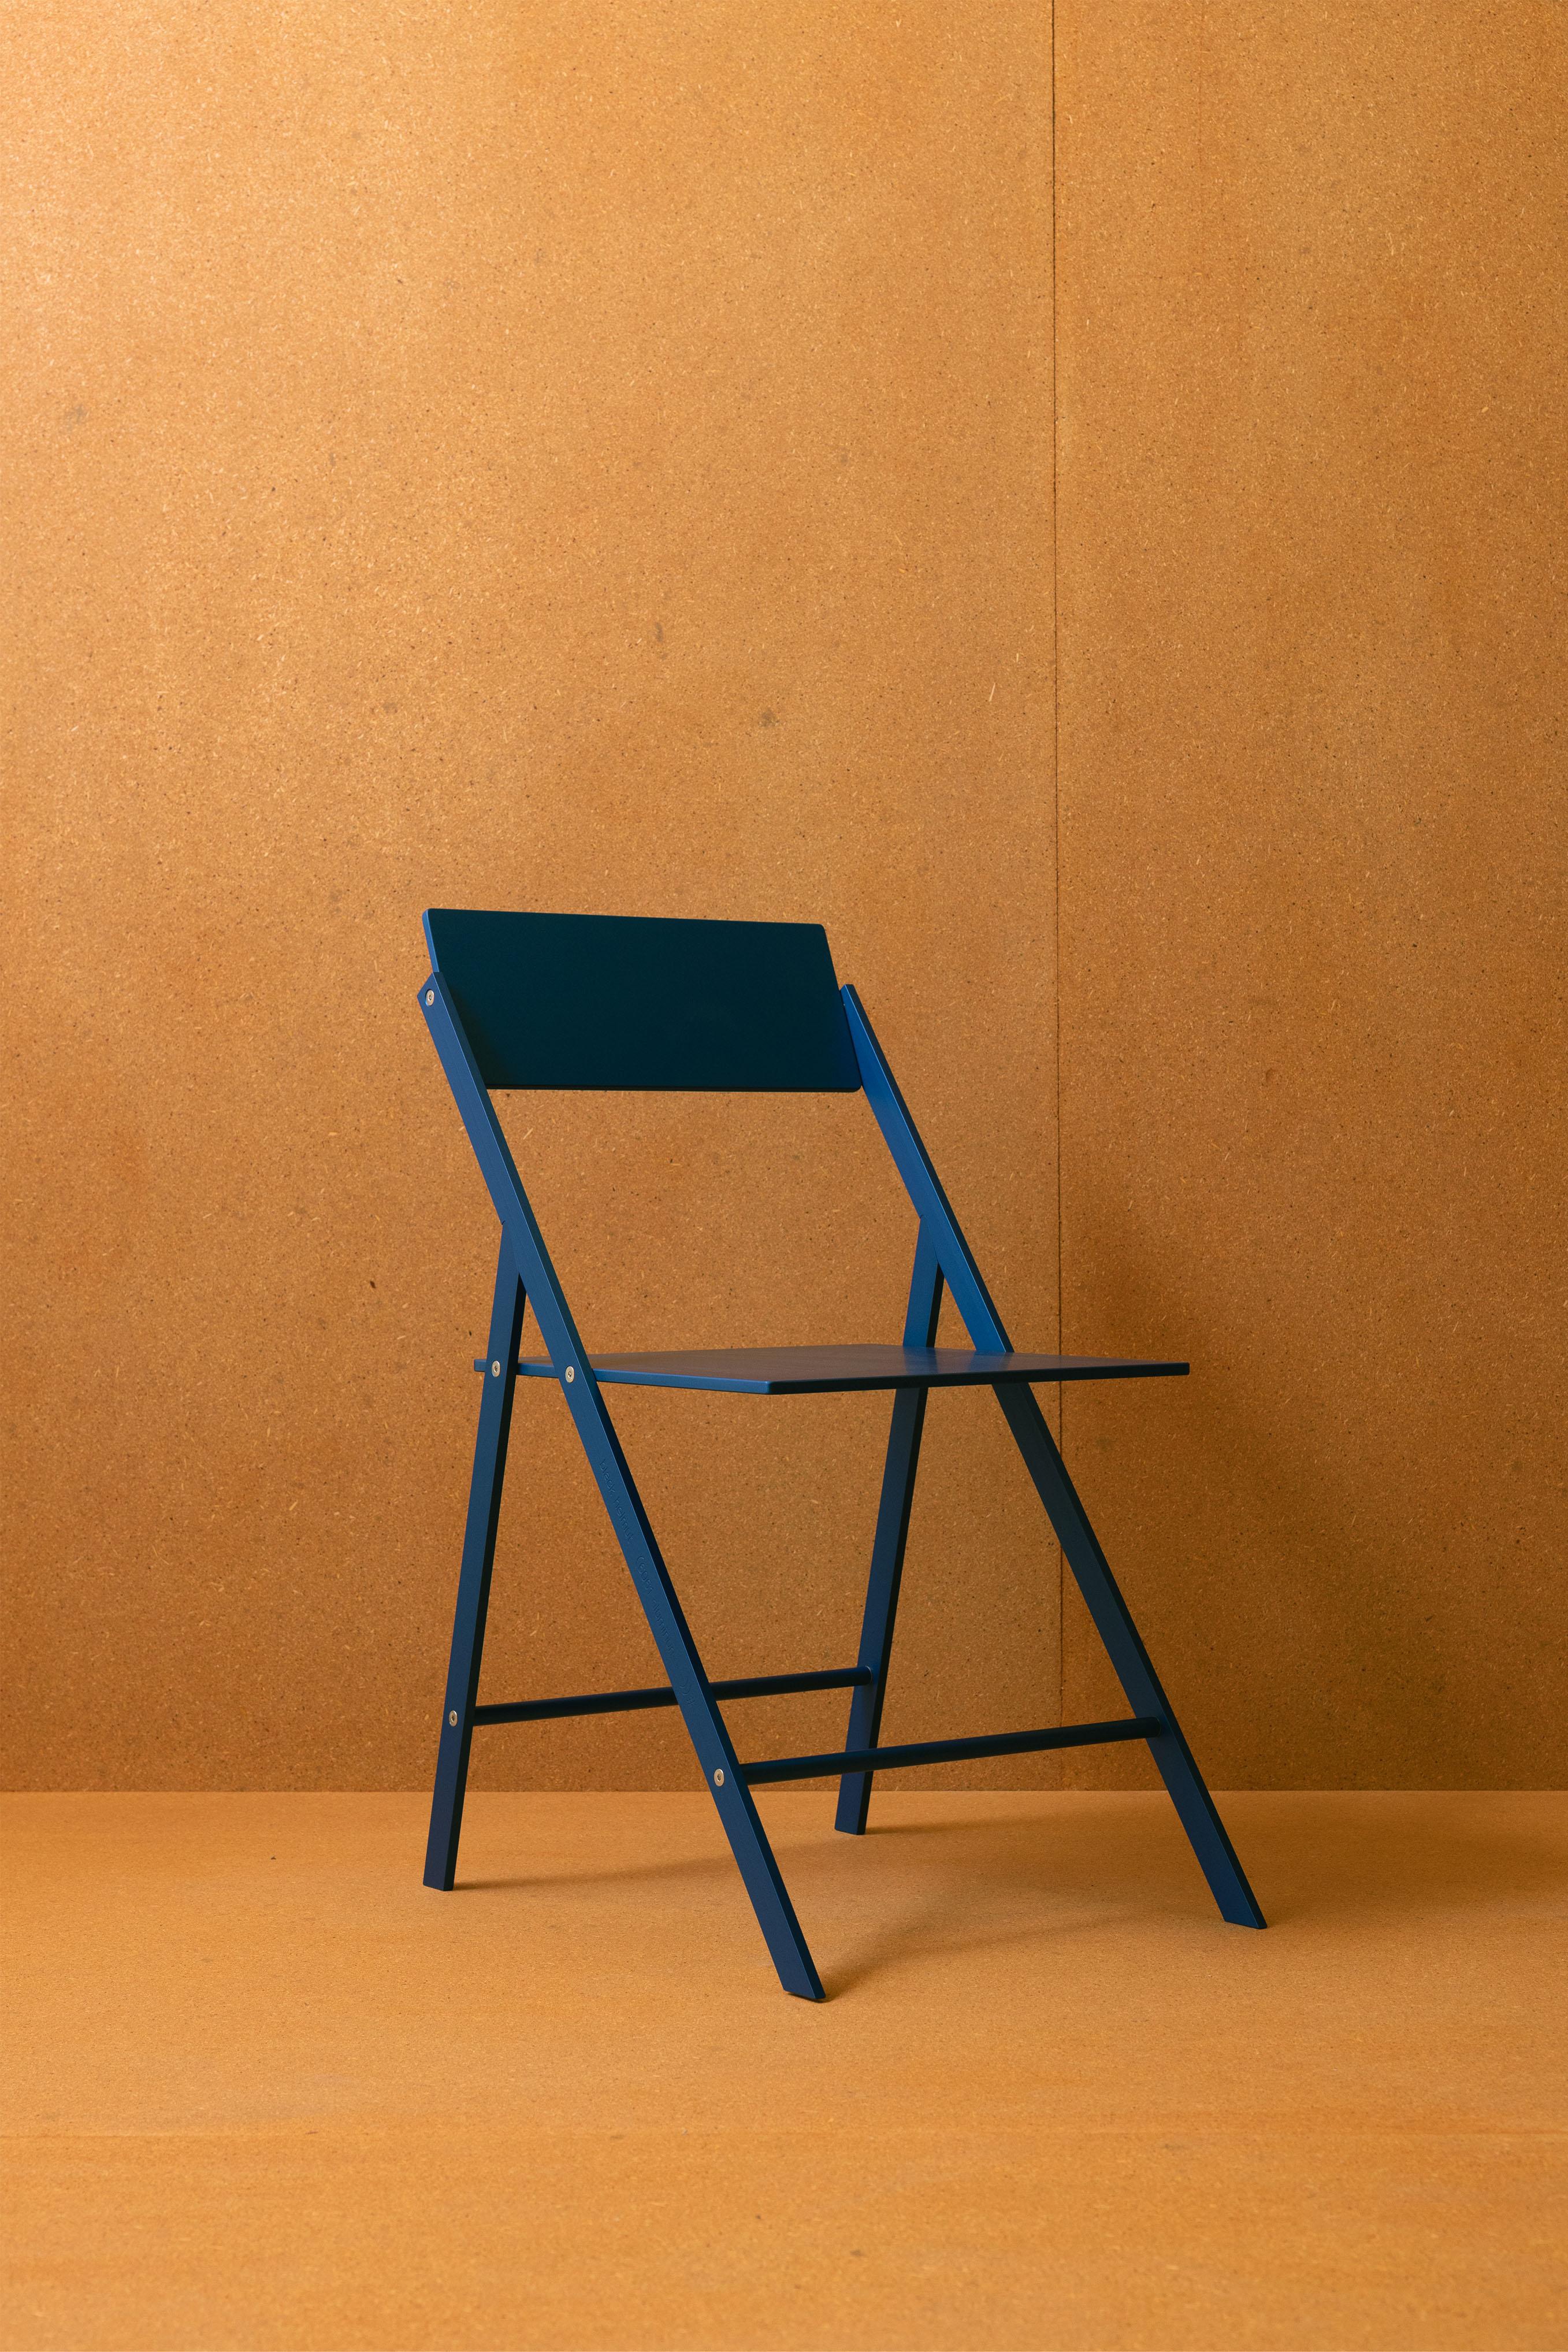 The Folding Chair by black helmut; the utility of a folding chair reimagined in luxury materiality and post-modern form. 

blue anodized “international klein blue” finish

solid 6061 aluminum structure, aluminum seat, swiveling back rest,